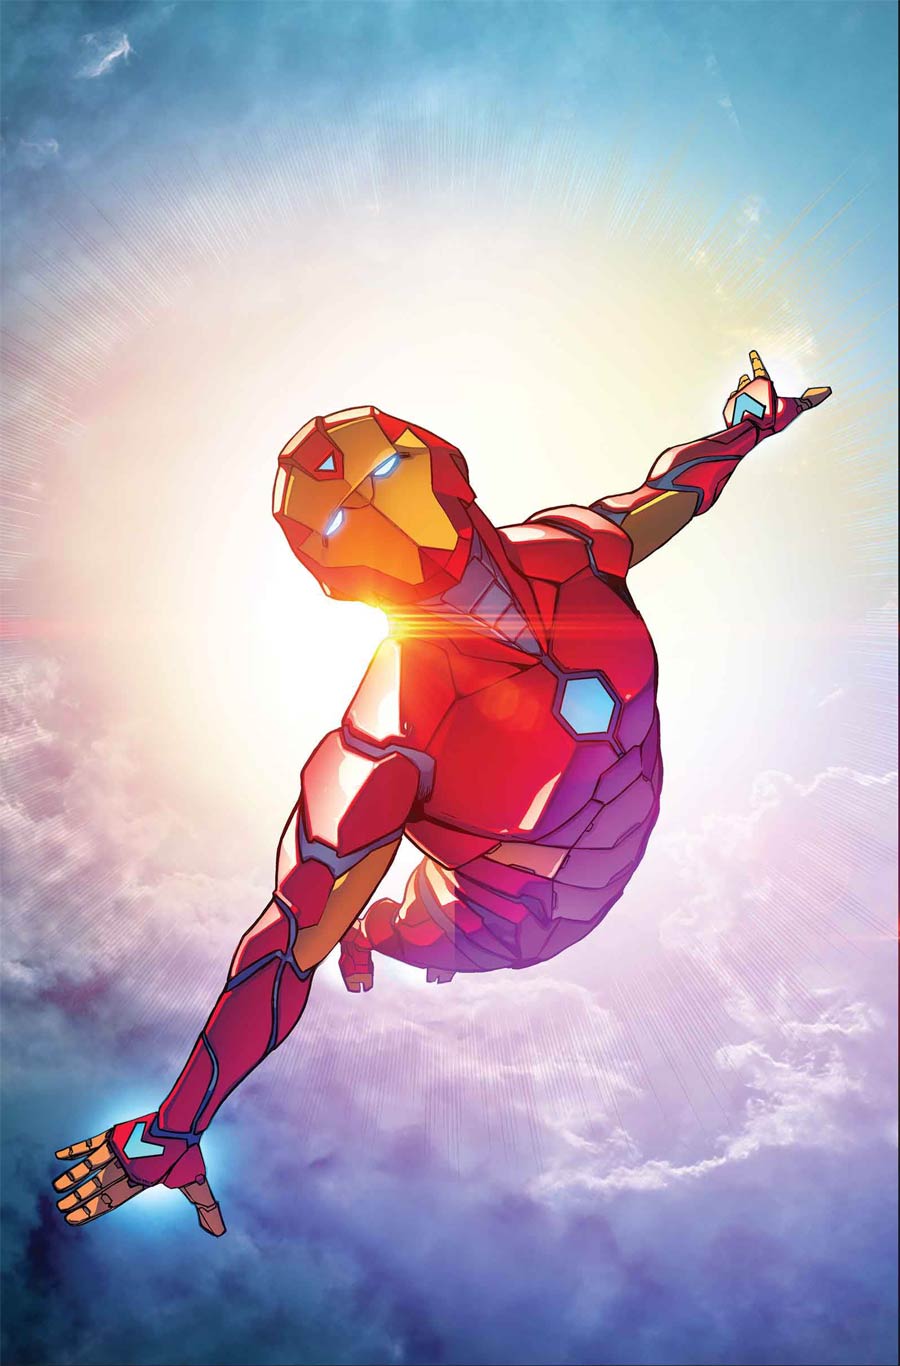 Invincible Iron Man Vol 3 #1 By Stefano Caselli Poster